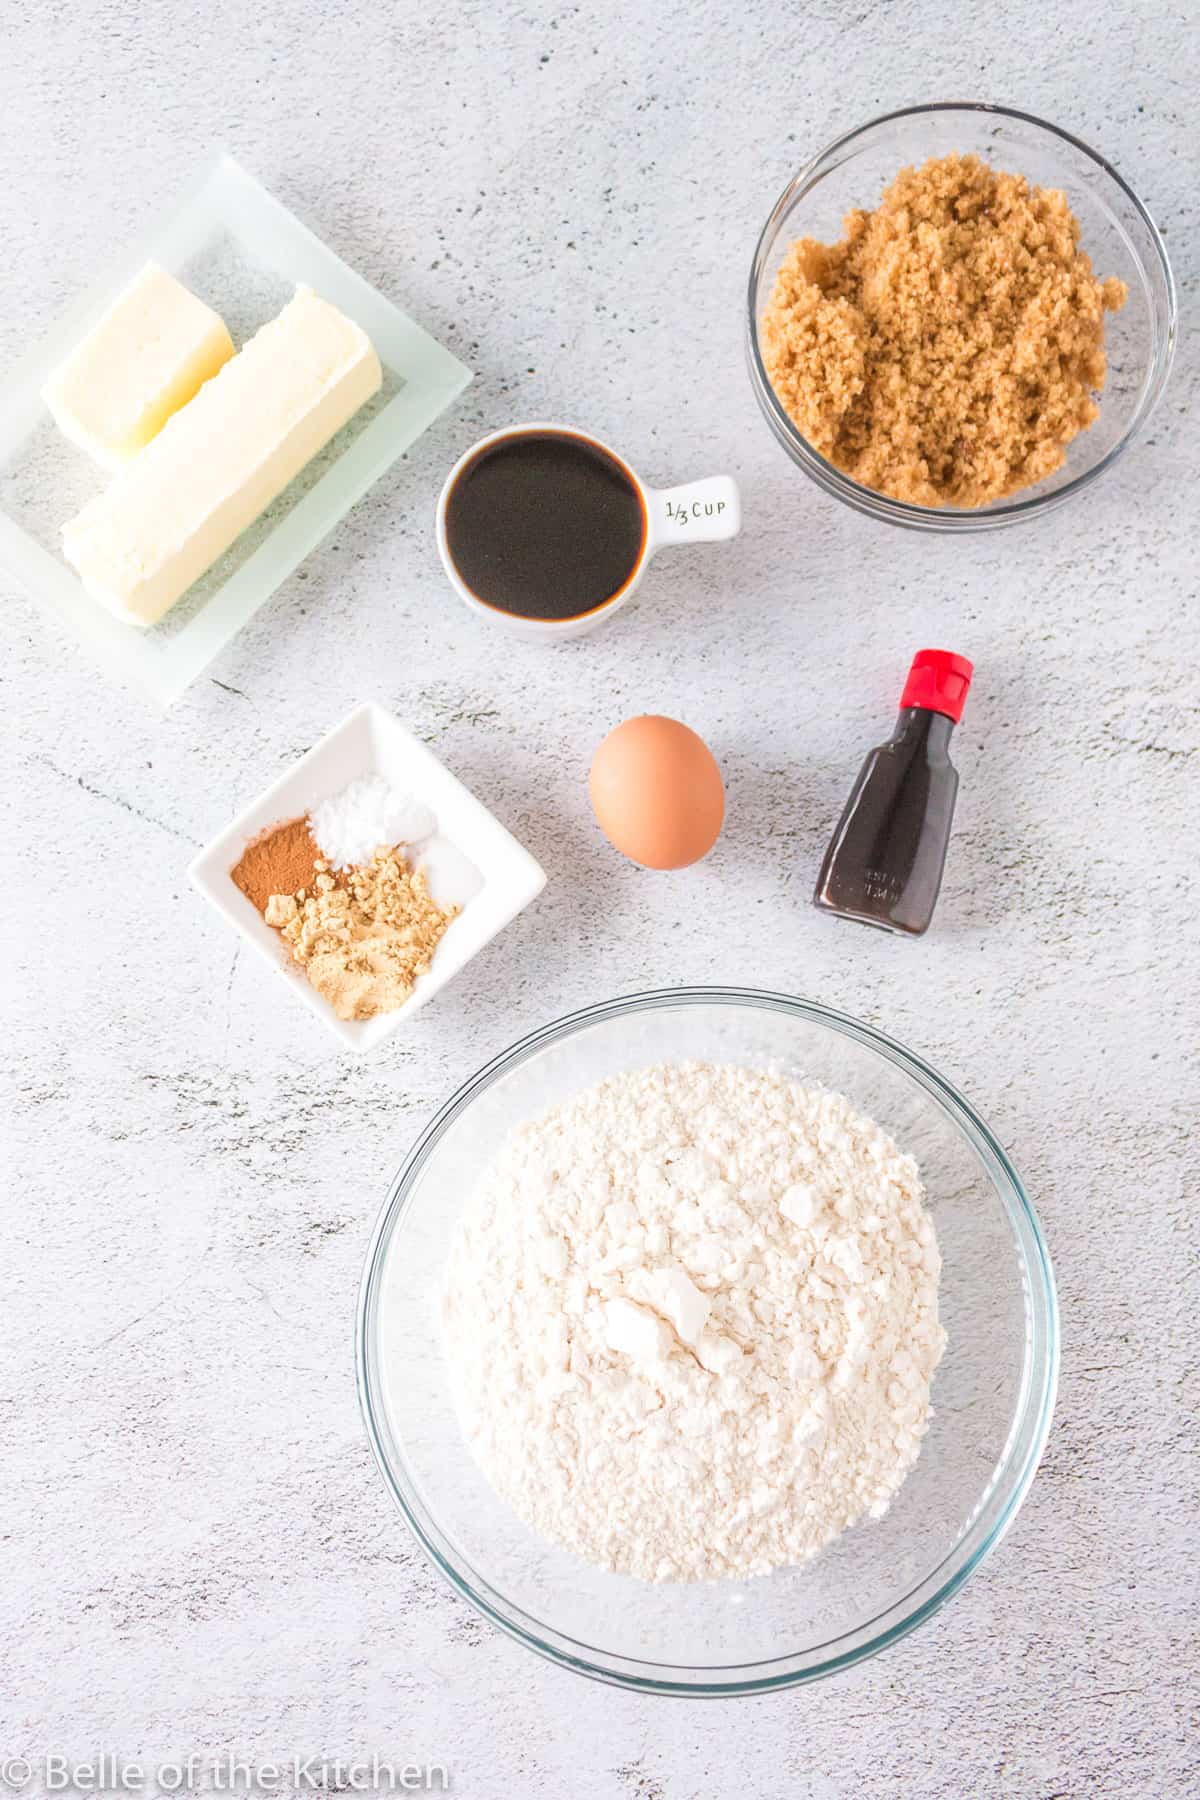 ingredients laid out to make cookies